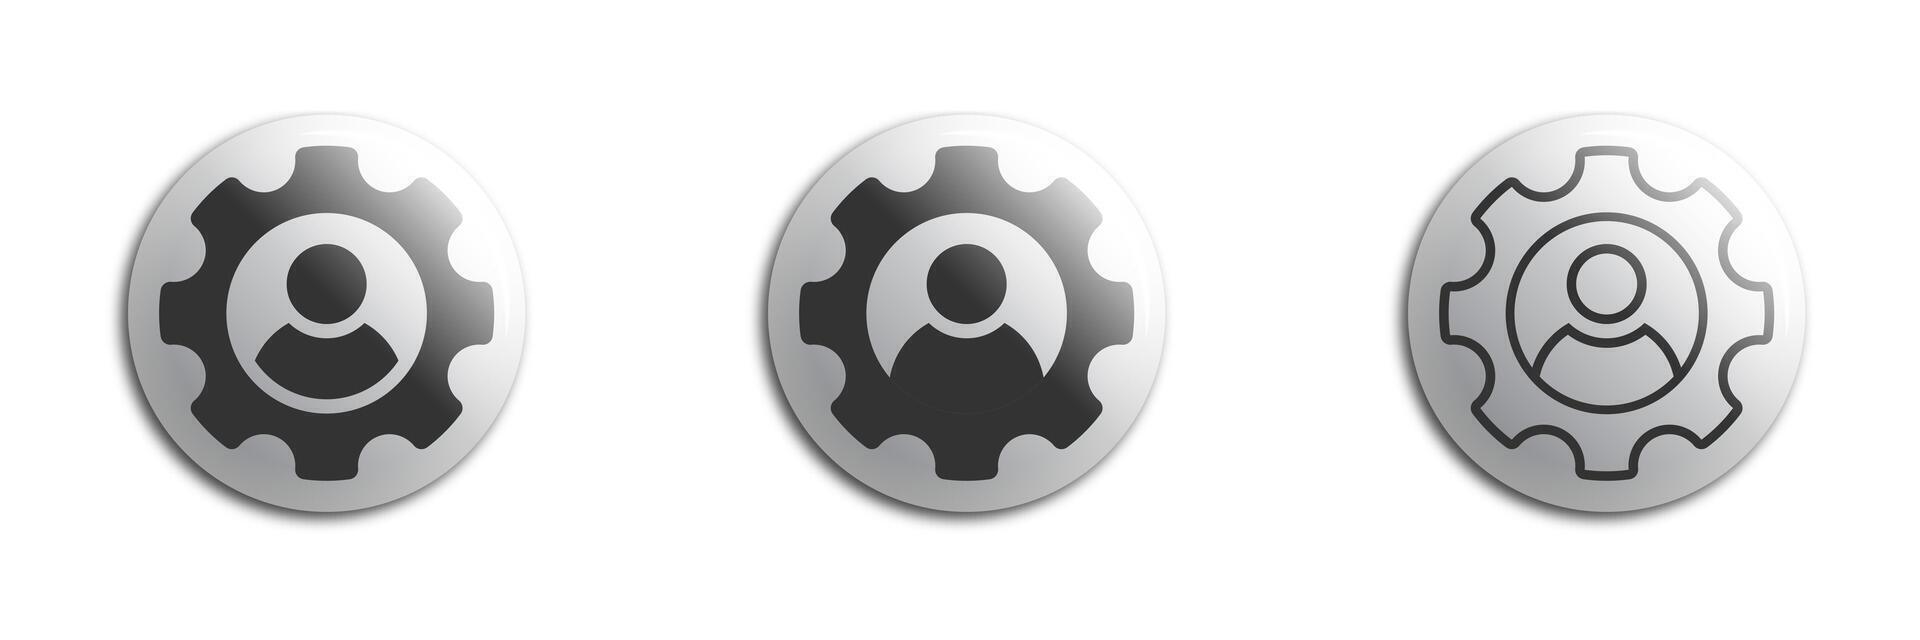 Man in gear icon. Man and cog sign. Flat vector illustration.